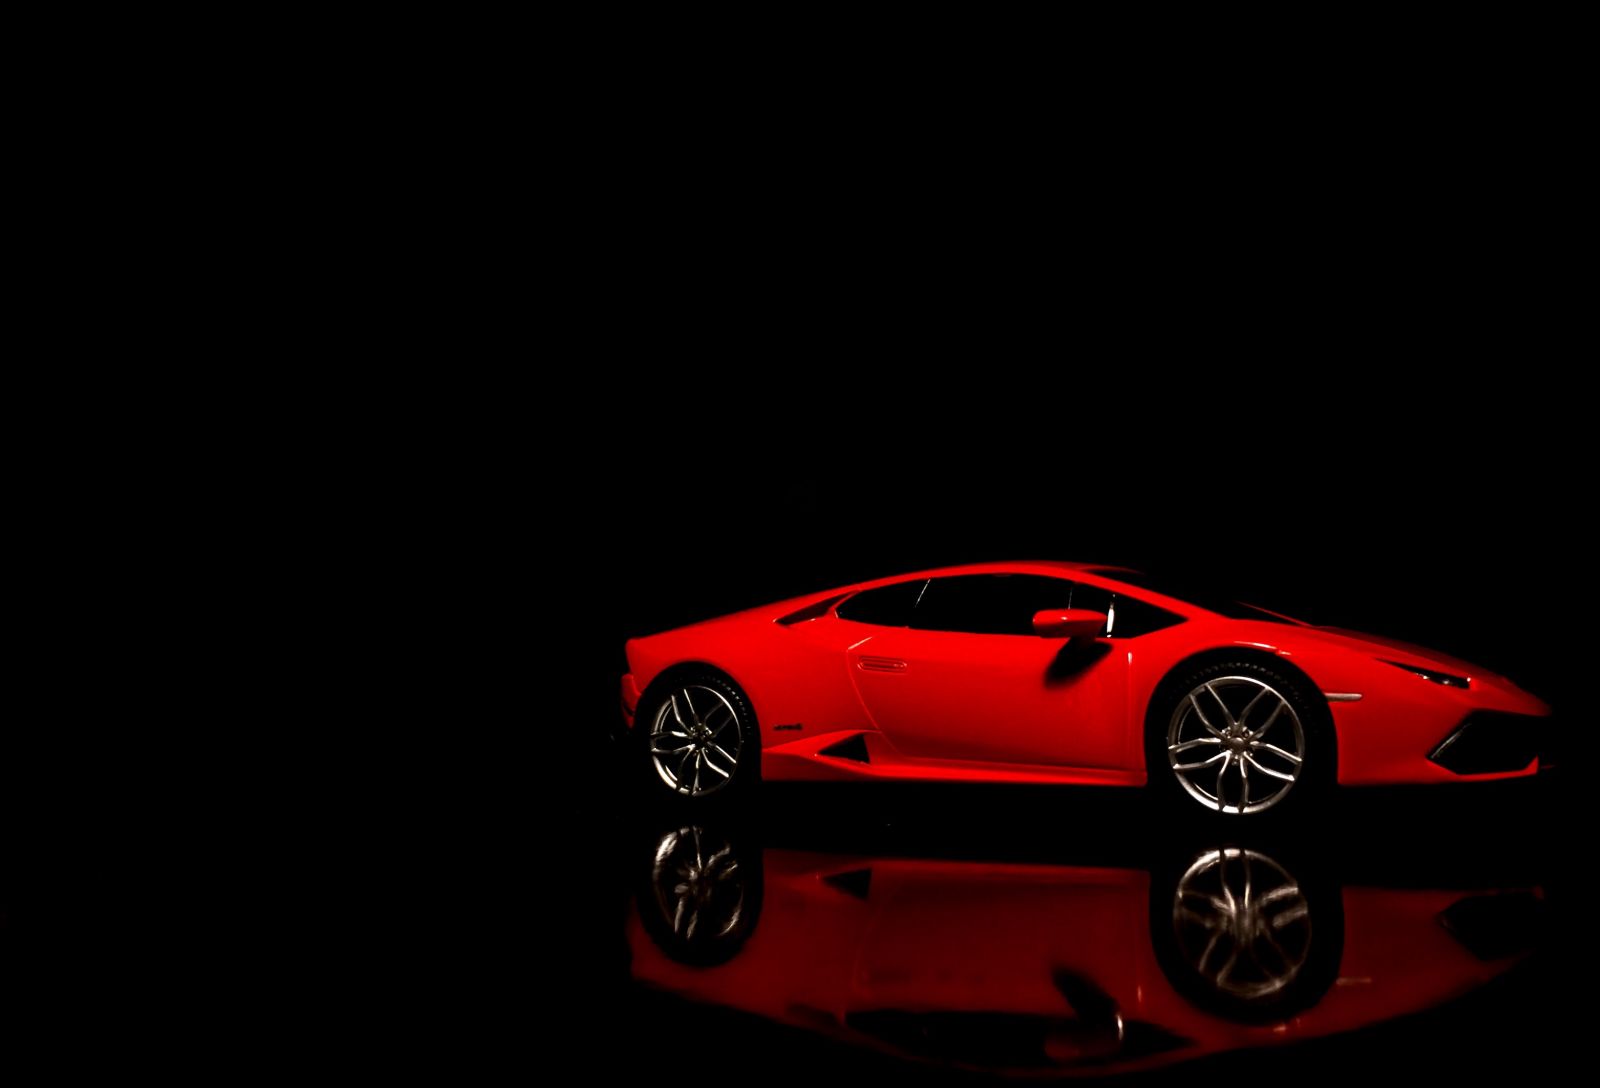 Illustration for article titled Just a red Huracan.